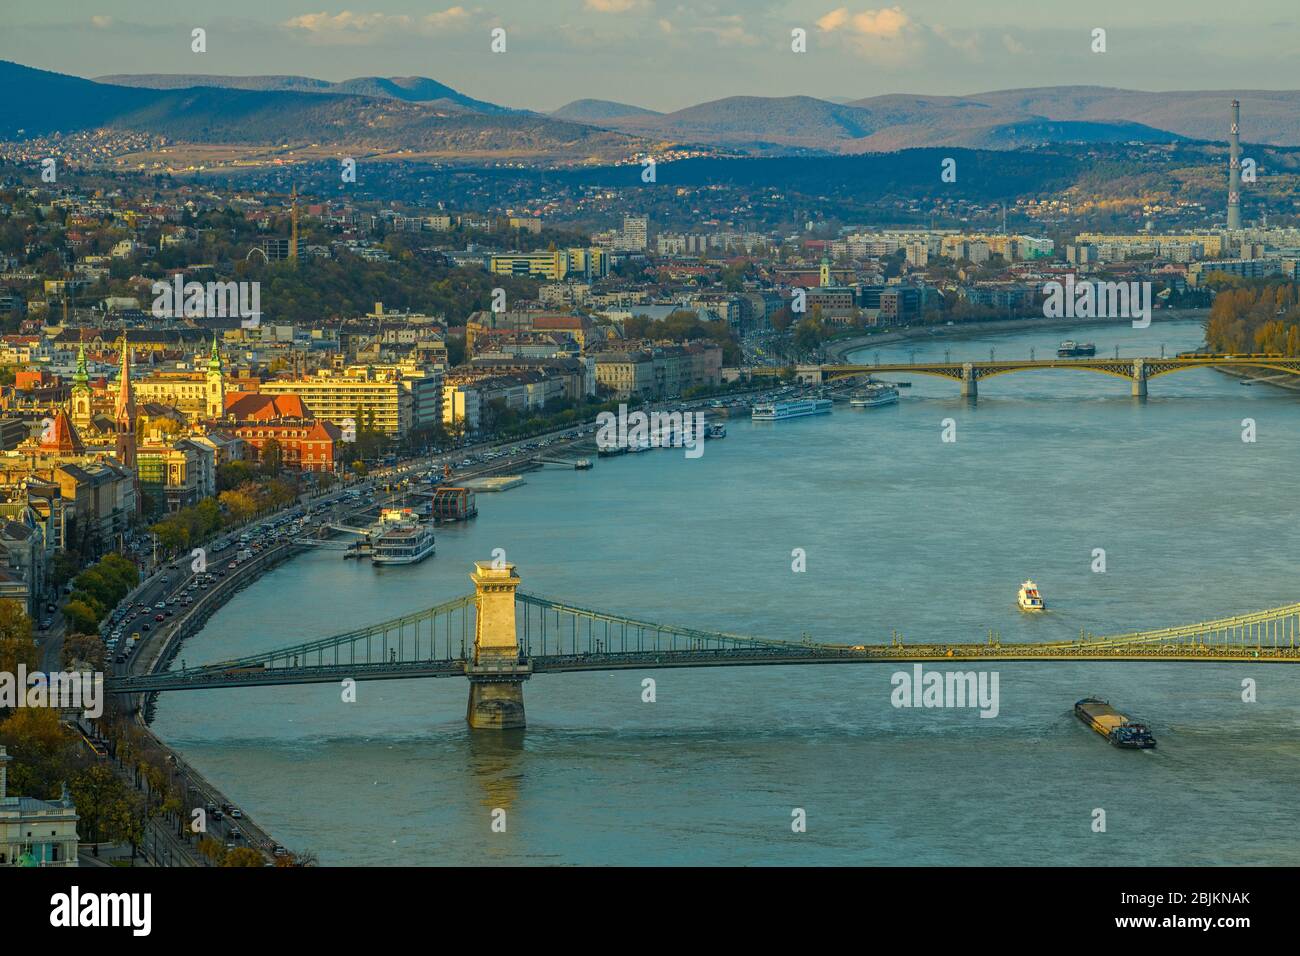 Views of Budapest from the Citadella- River Danube with bridges, Budapest, Central Hungary, Hungary. Stock Photo